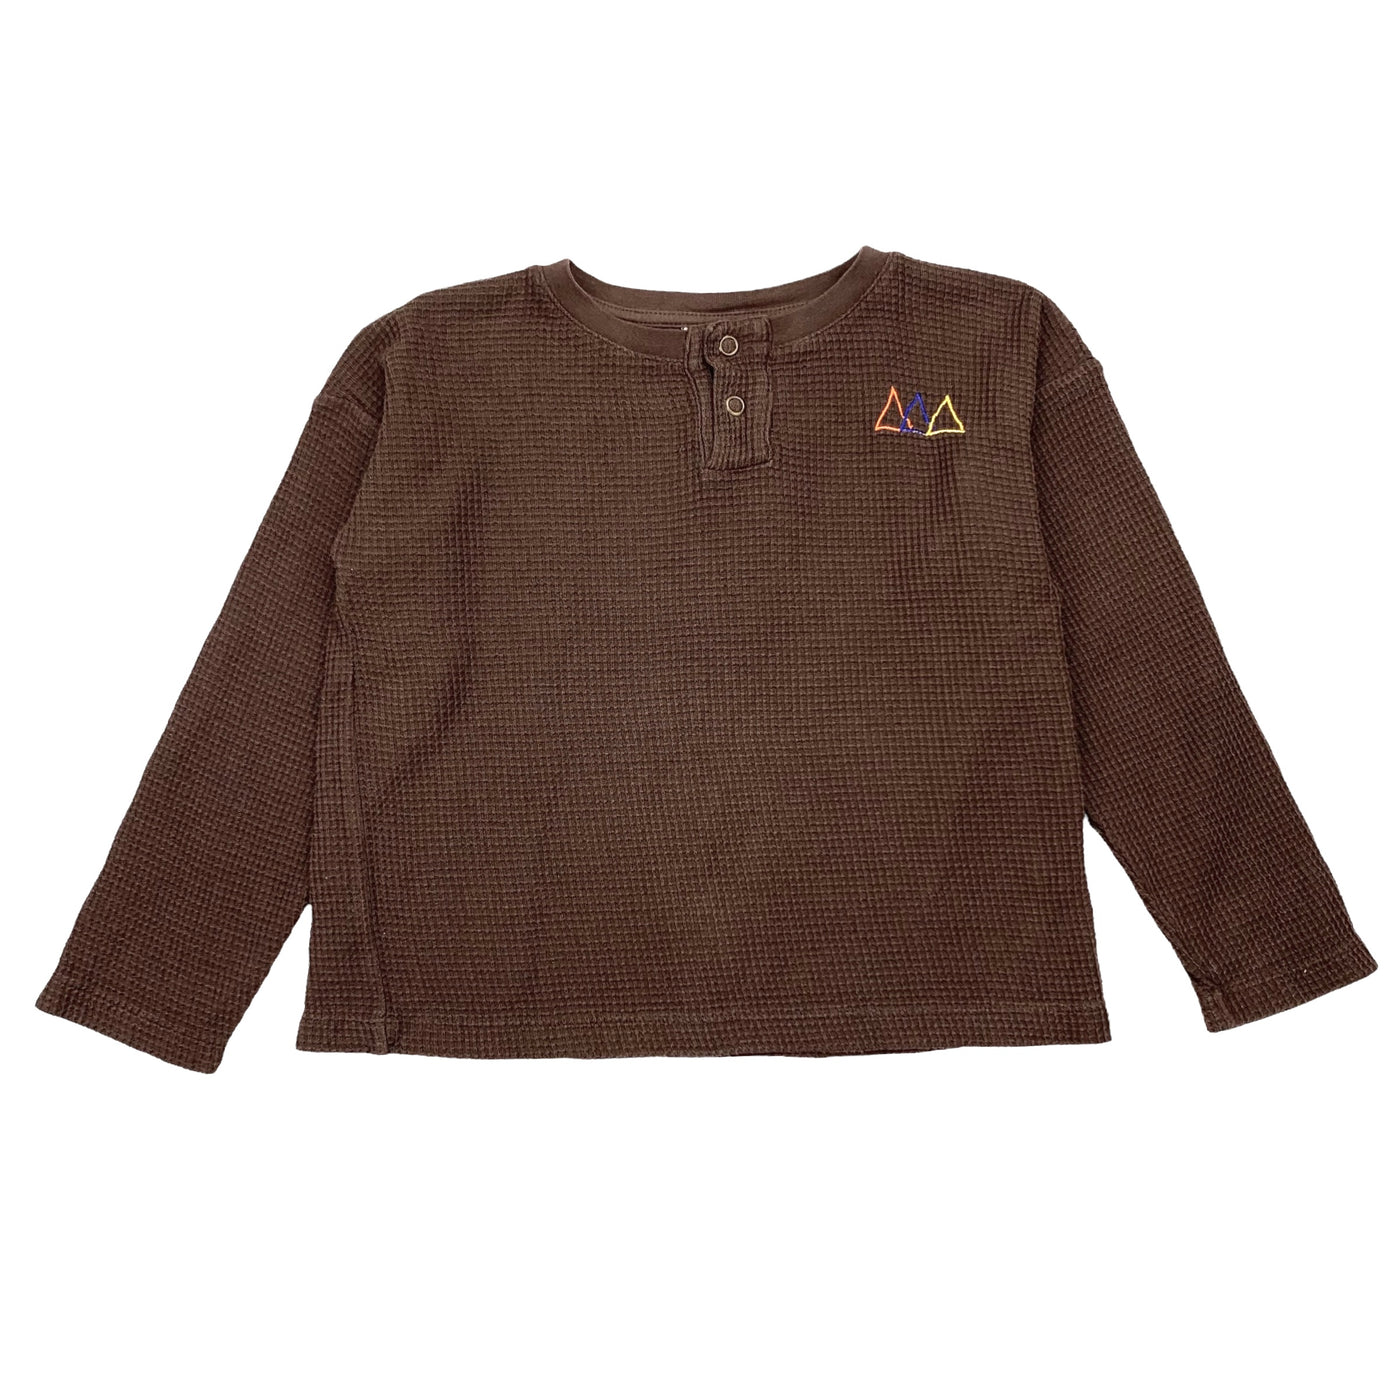 The campamento longsleeve / sweater brown waffle size 3 - 4 years